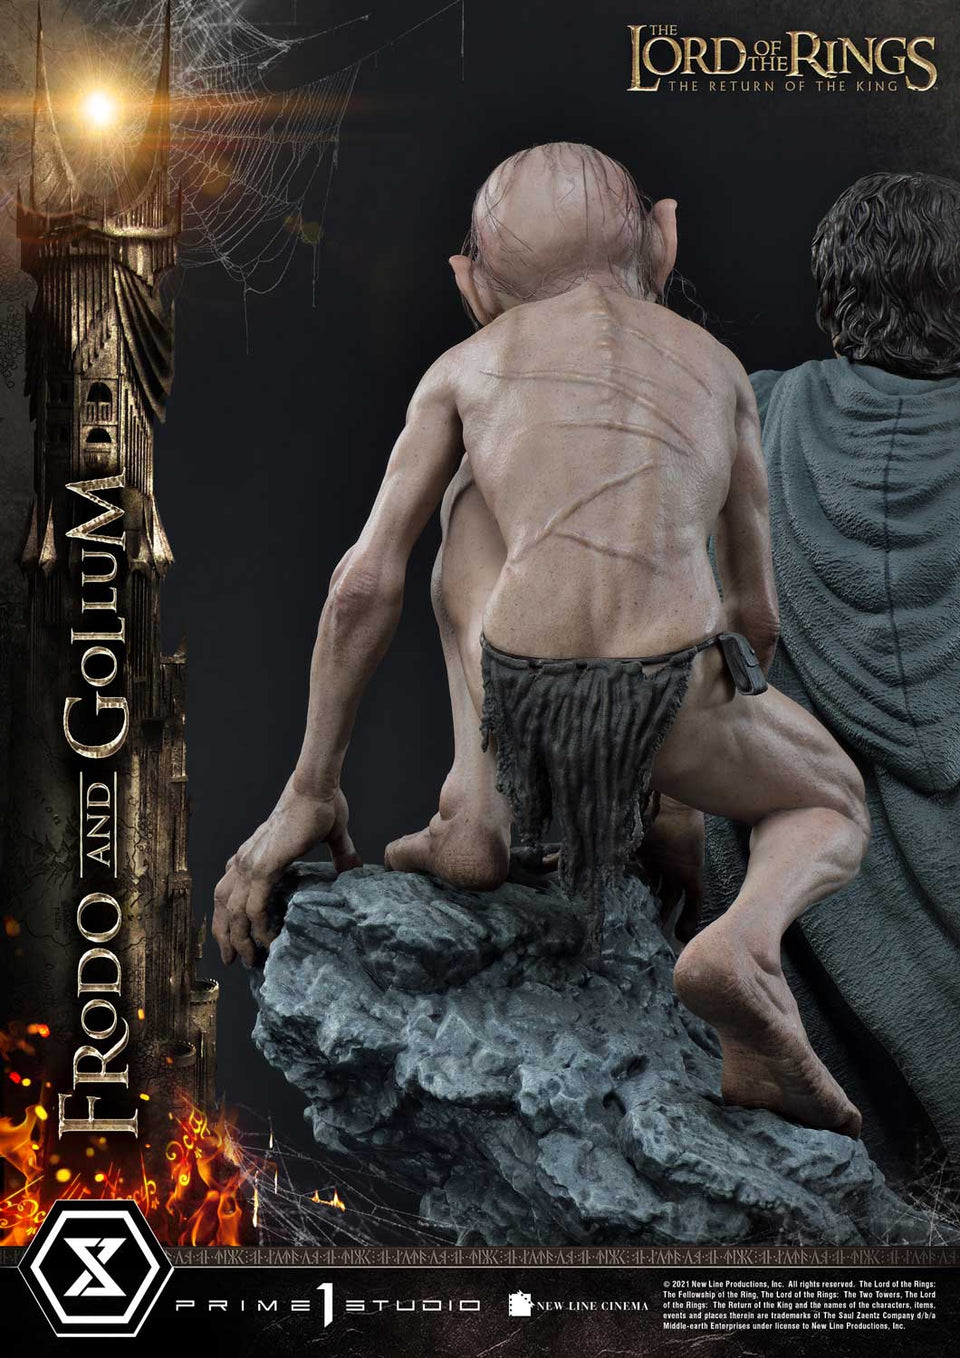 Prime 1 Studio Frodo and Gollum (Lord of the Rings: The Return of the King) (Bonus Version) 1/4 Scale Statue